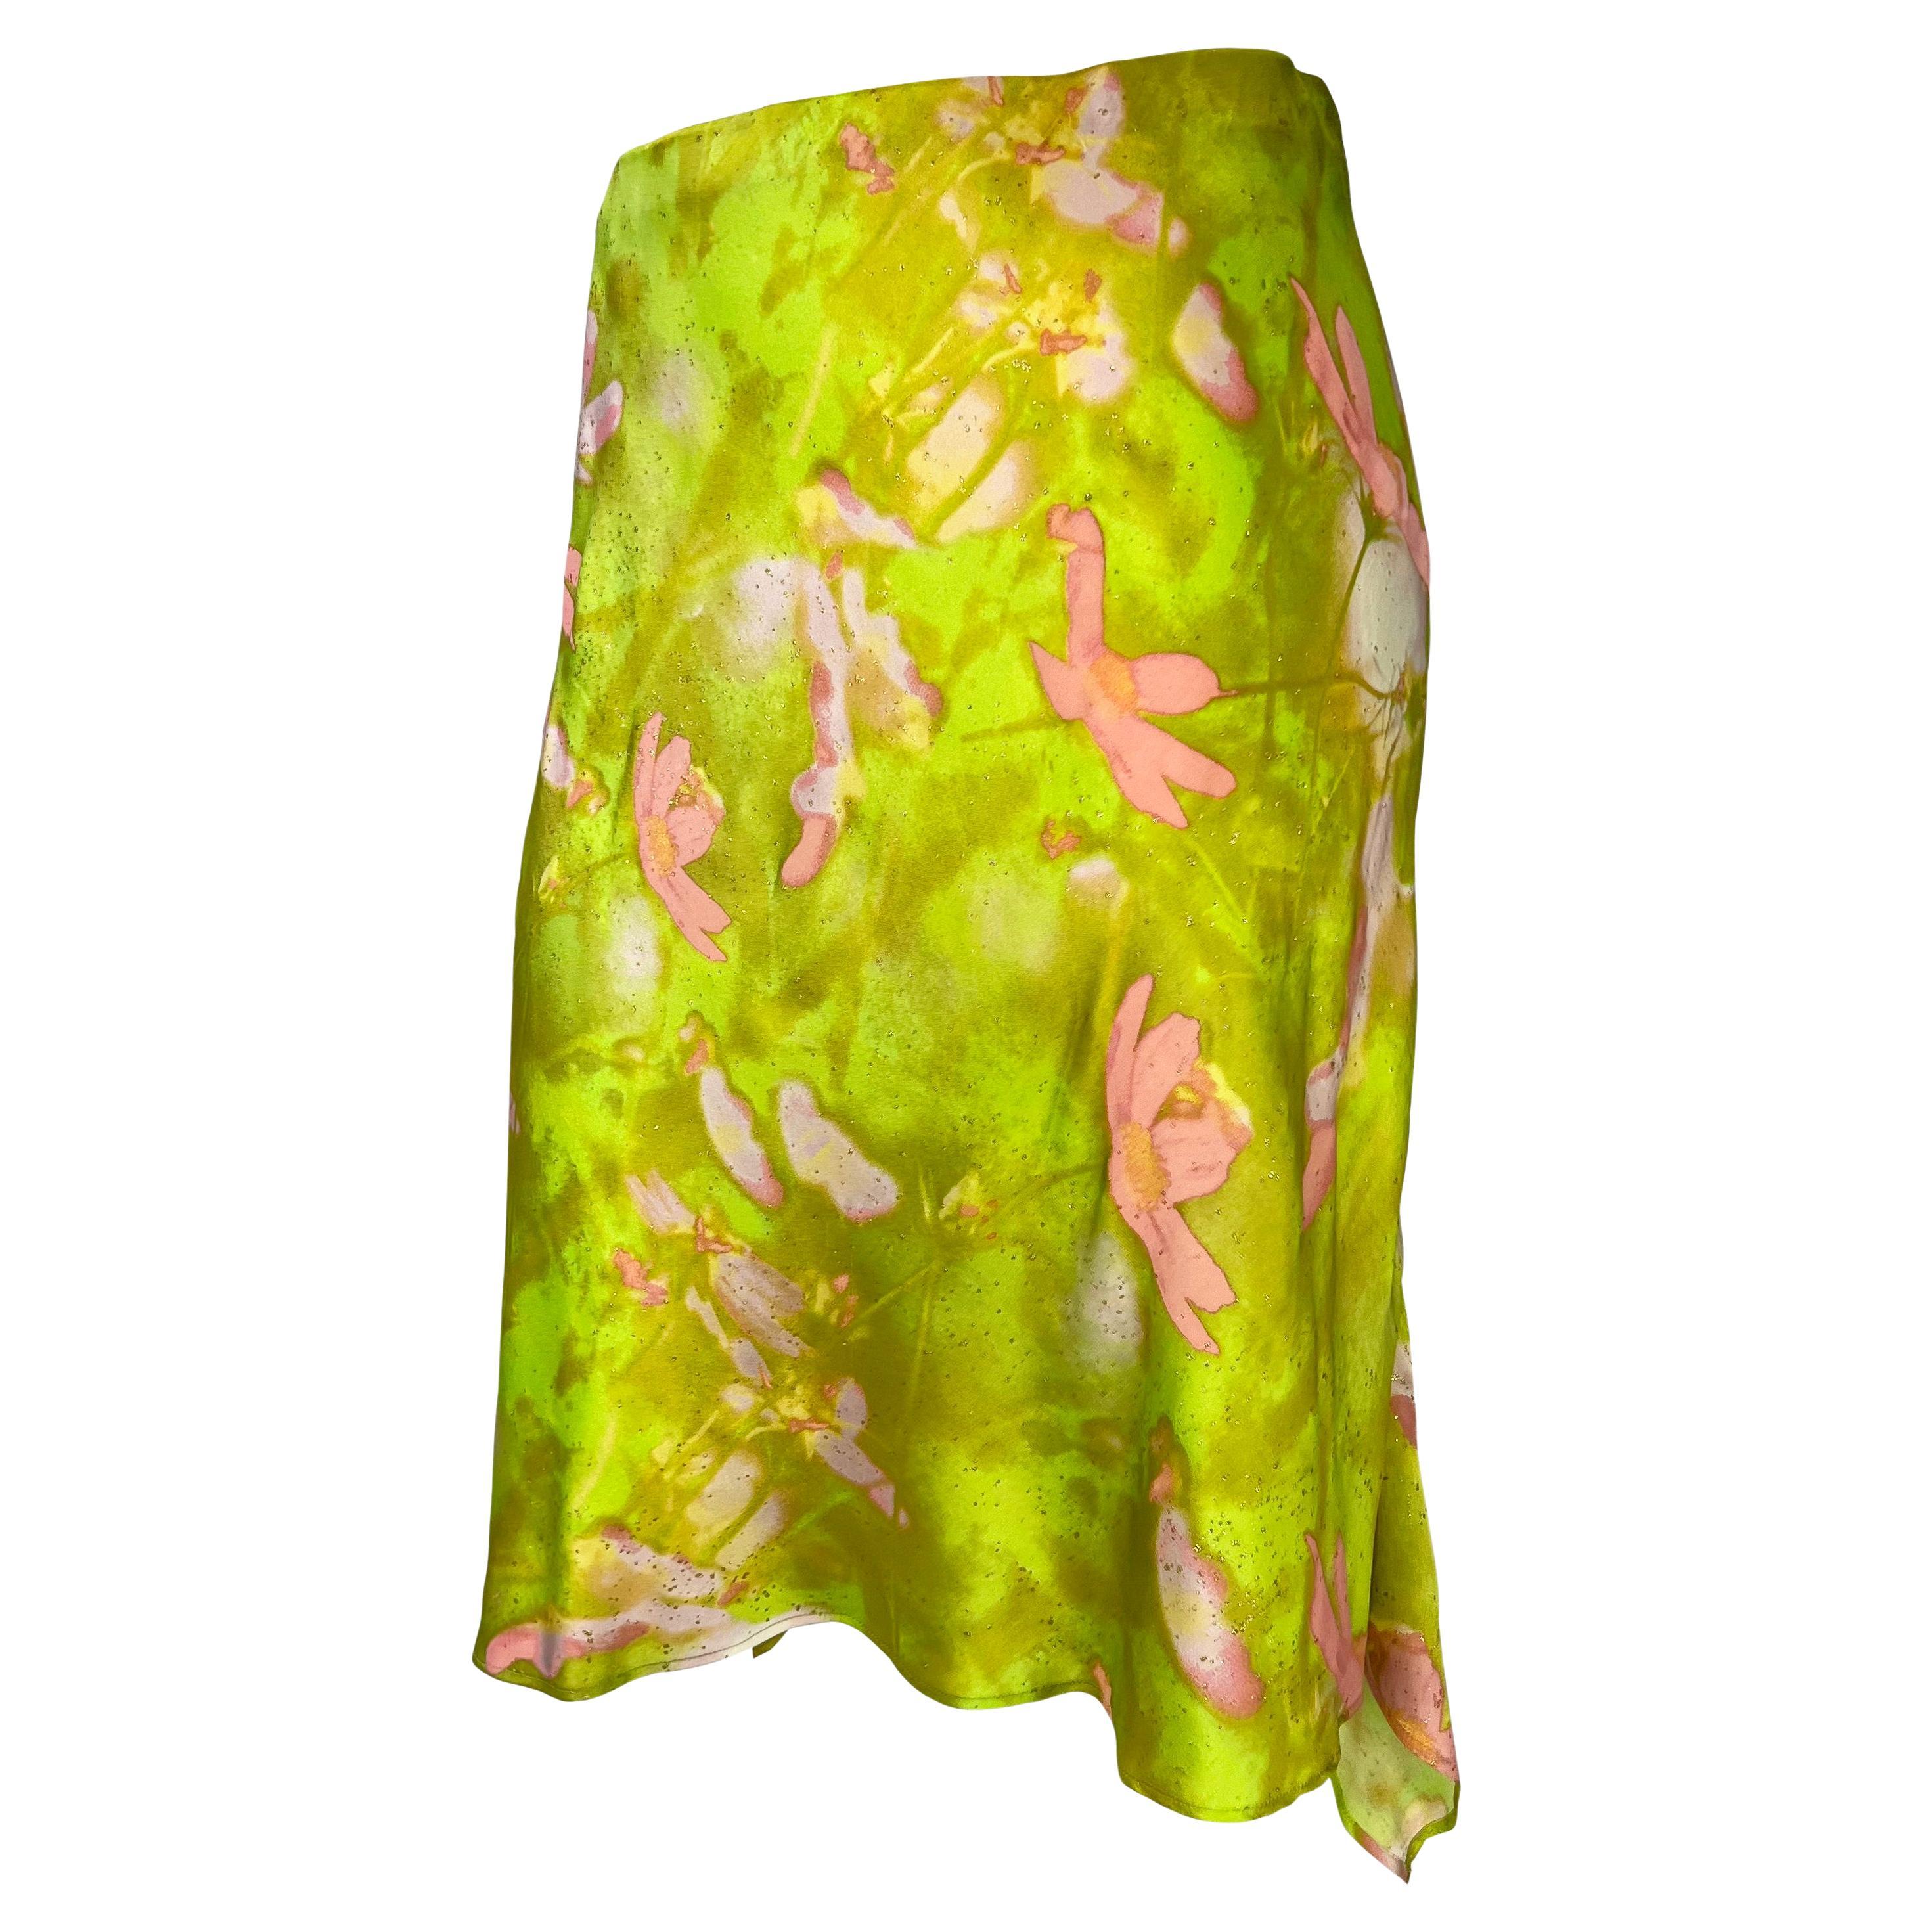 TheRealList presents: a chartreuse floral Roberto Cavalli skirt. From the late 1990s, this fabulous skirt features a flare cut and elastic waistband. The skirt is covered in a bright pink floral pattern with a chartreuse background and gold metallic